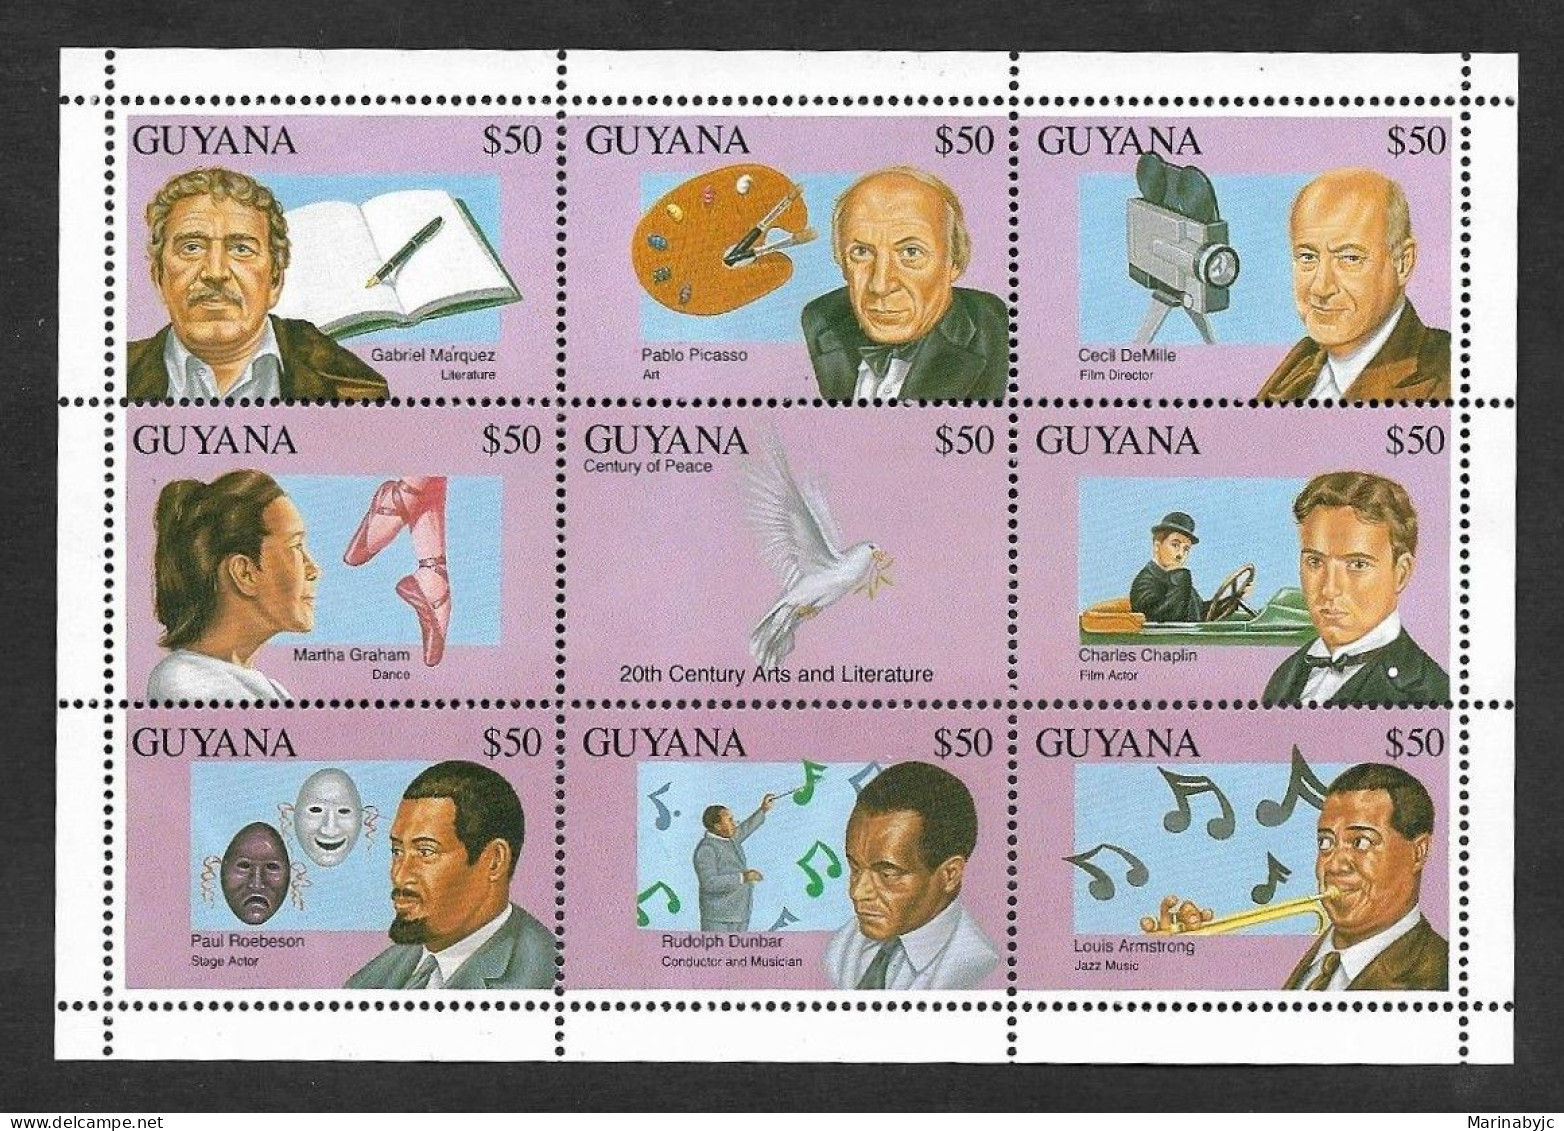 SD)1993 GUYANA FROM THE SERIES ART AND LITERATURE, CHARACTERS OF THE 20TH CENTURY, MINISHEET OF 9 STAMPS MNH - Guyana (1966-...)